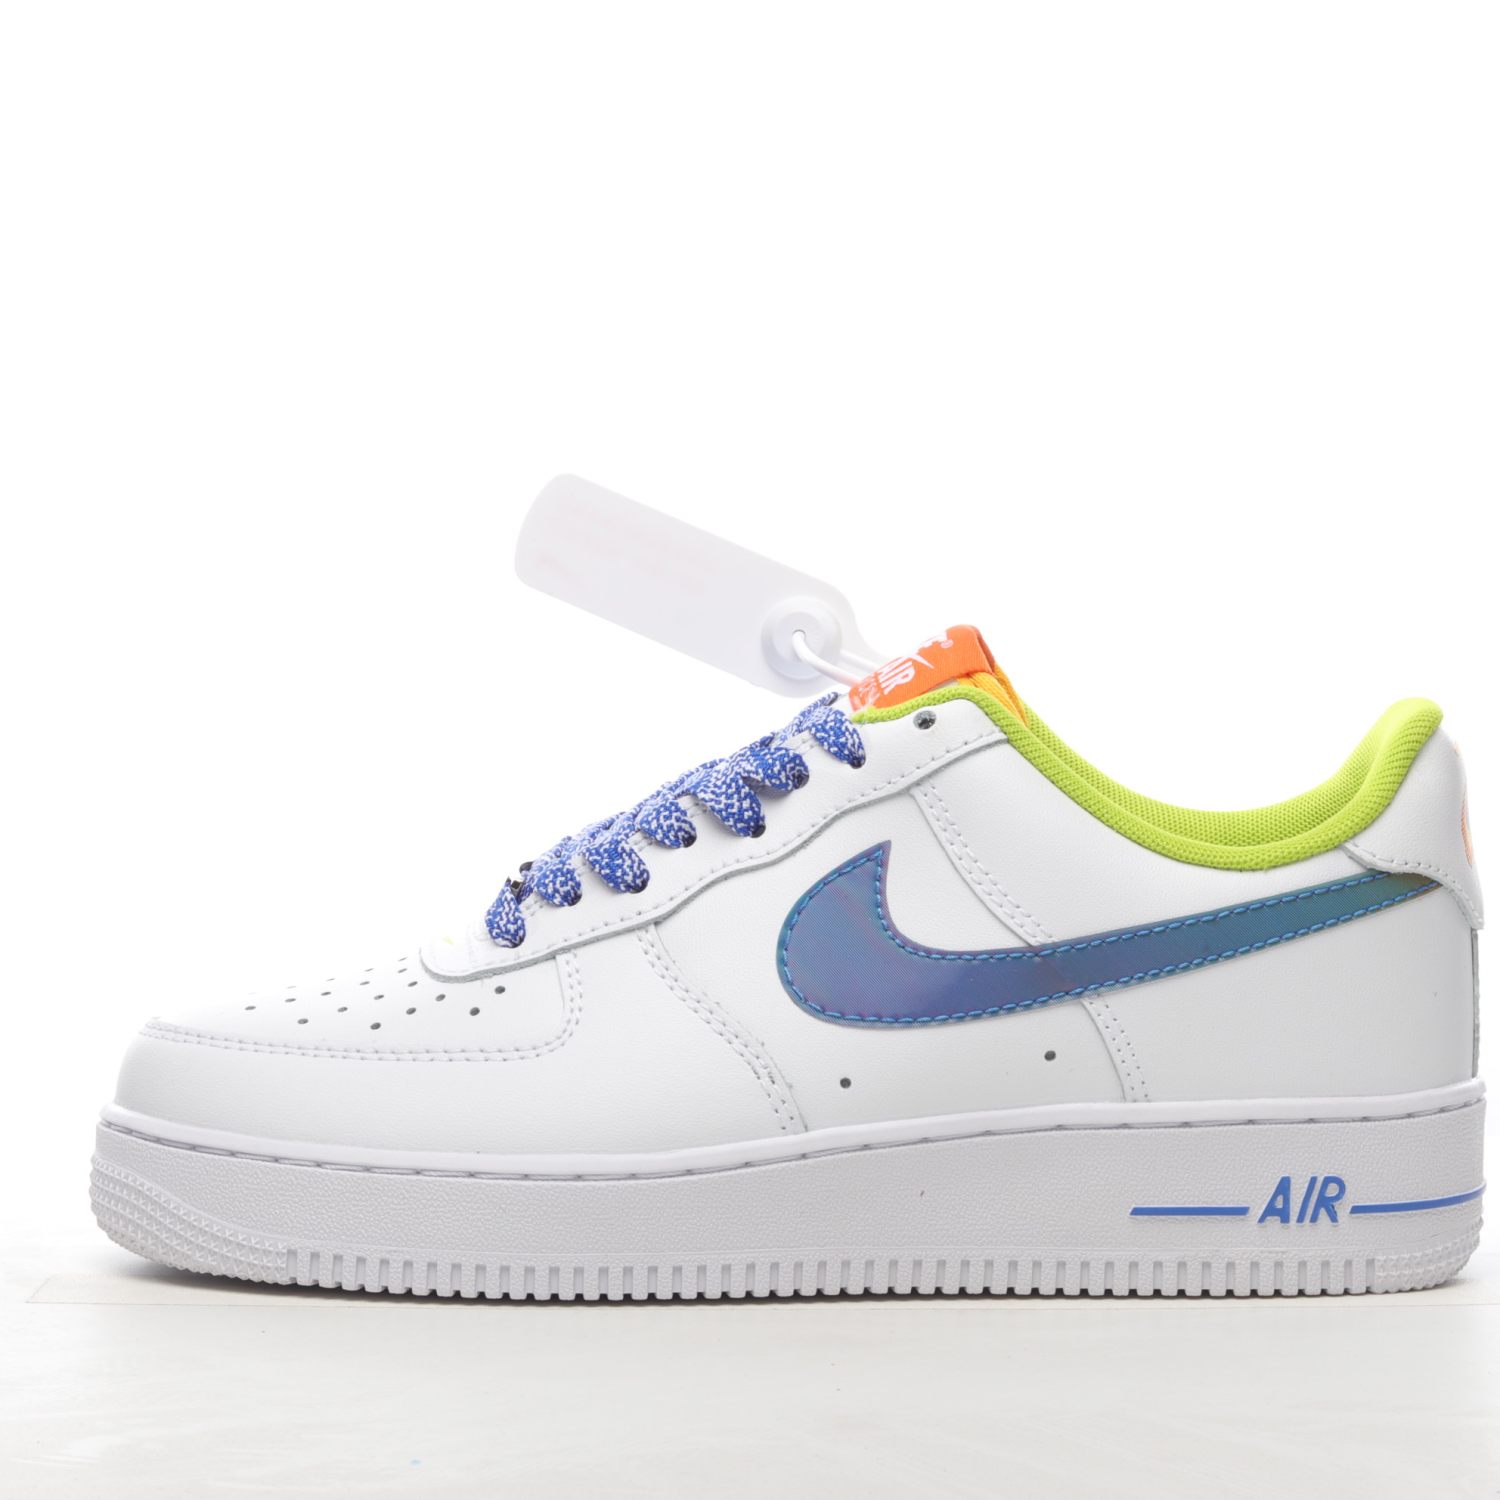 US$ 85.00 - SS TOP Nike Air Force 1 DQ7767-100 - www.stylesneaks.com